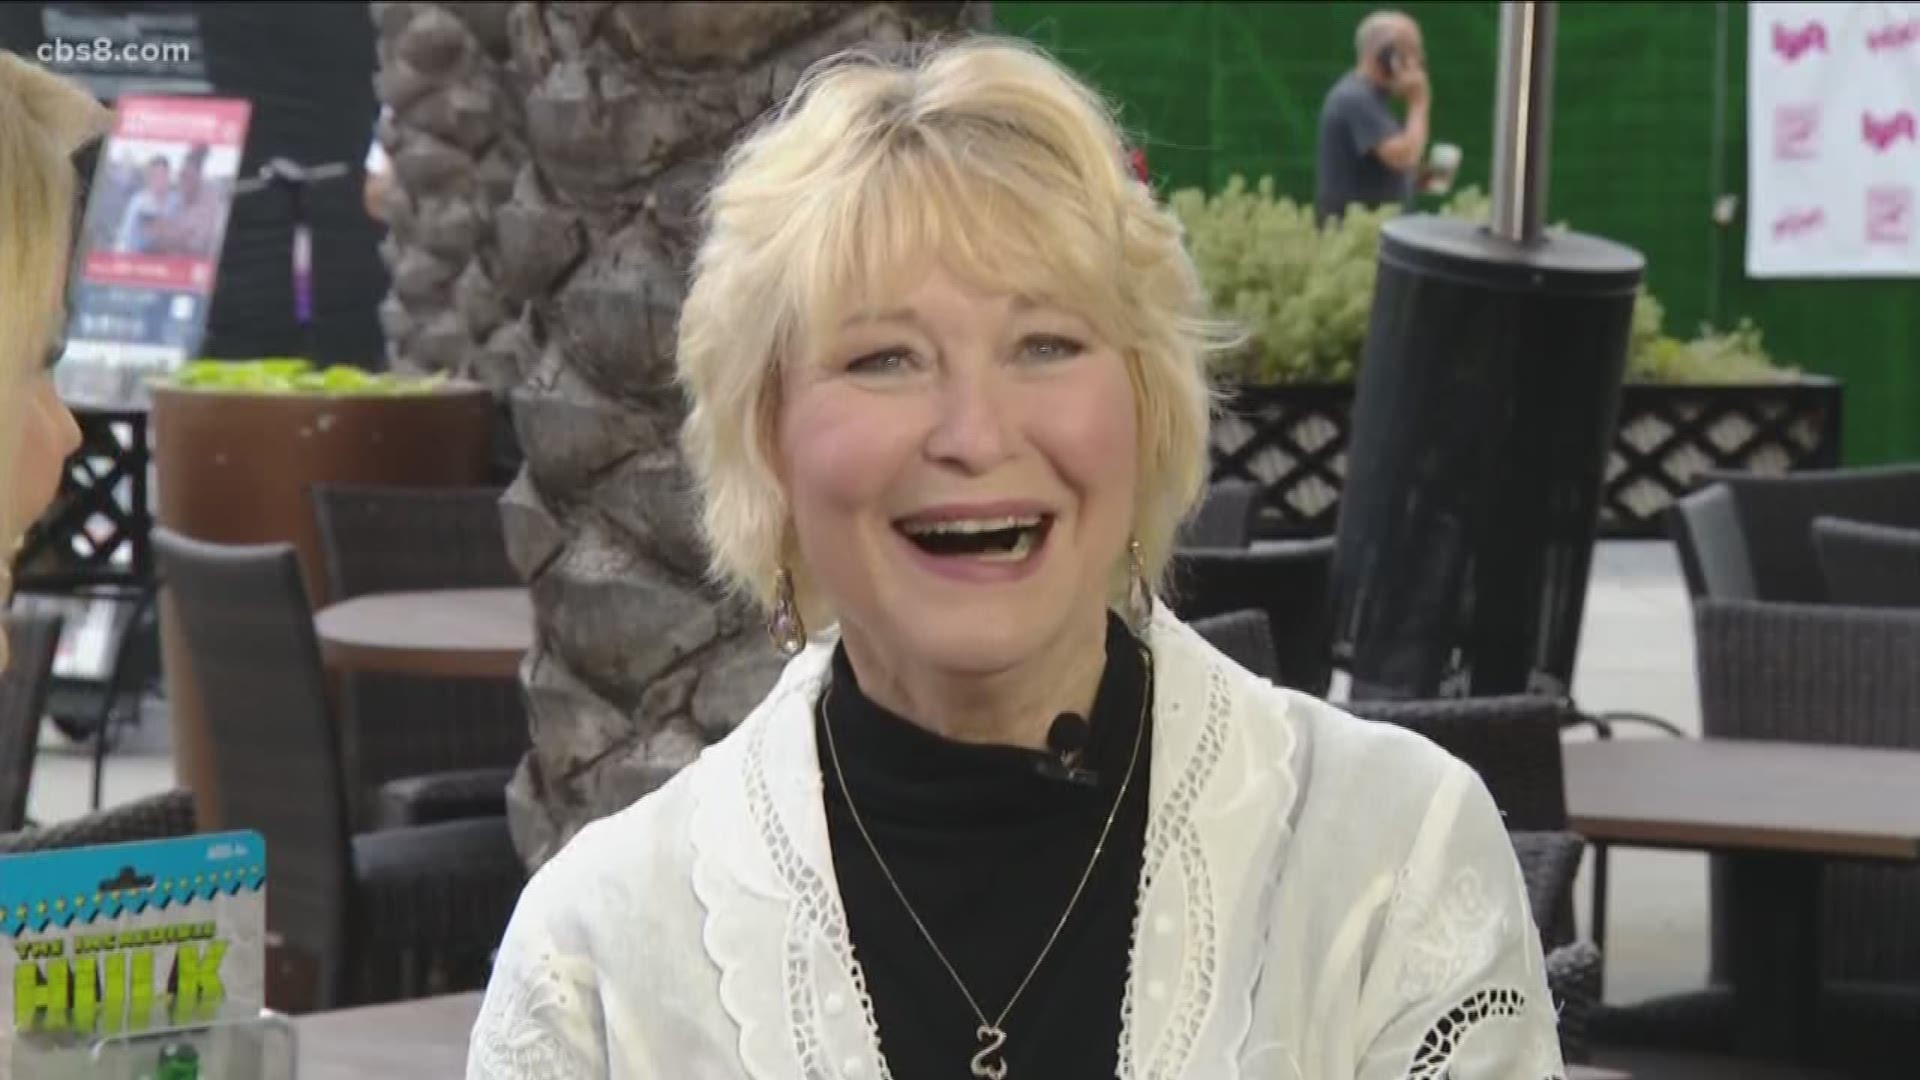 Dee Wallace stopped by Morning Extra to talk about everything from E.T. to her current project, Critters.